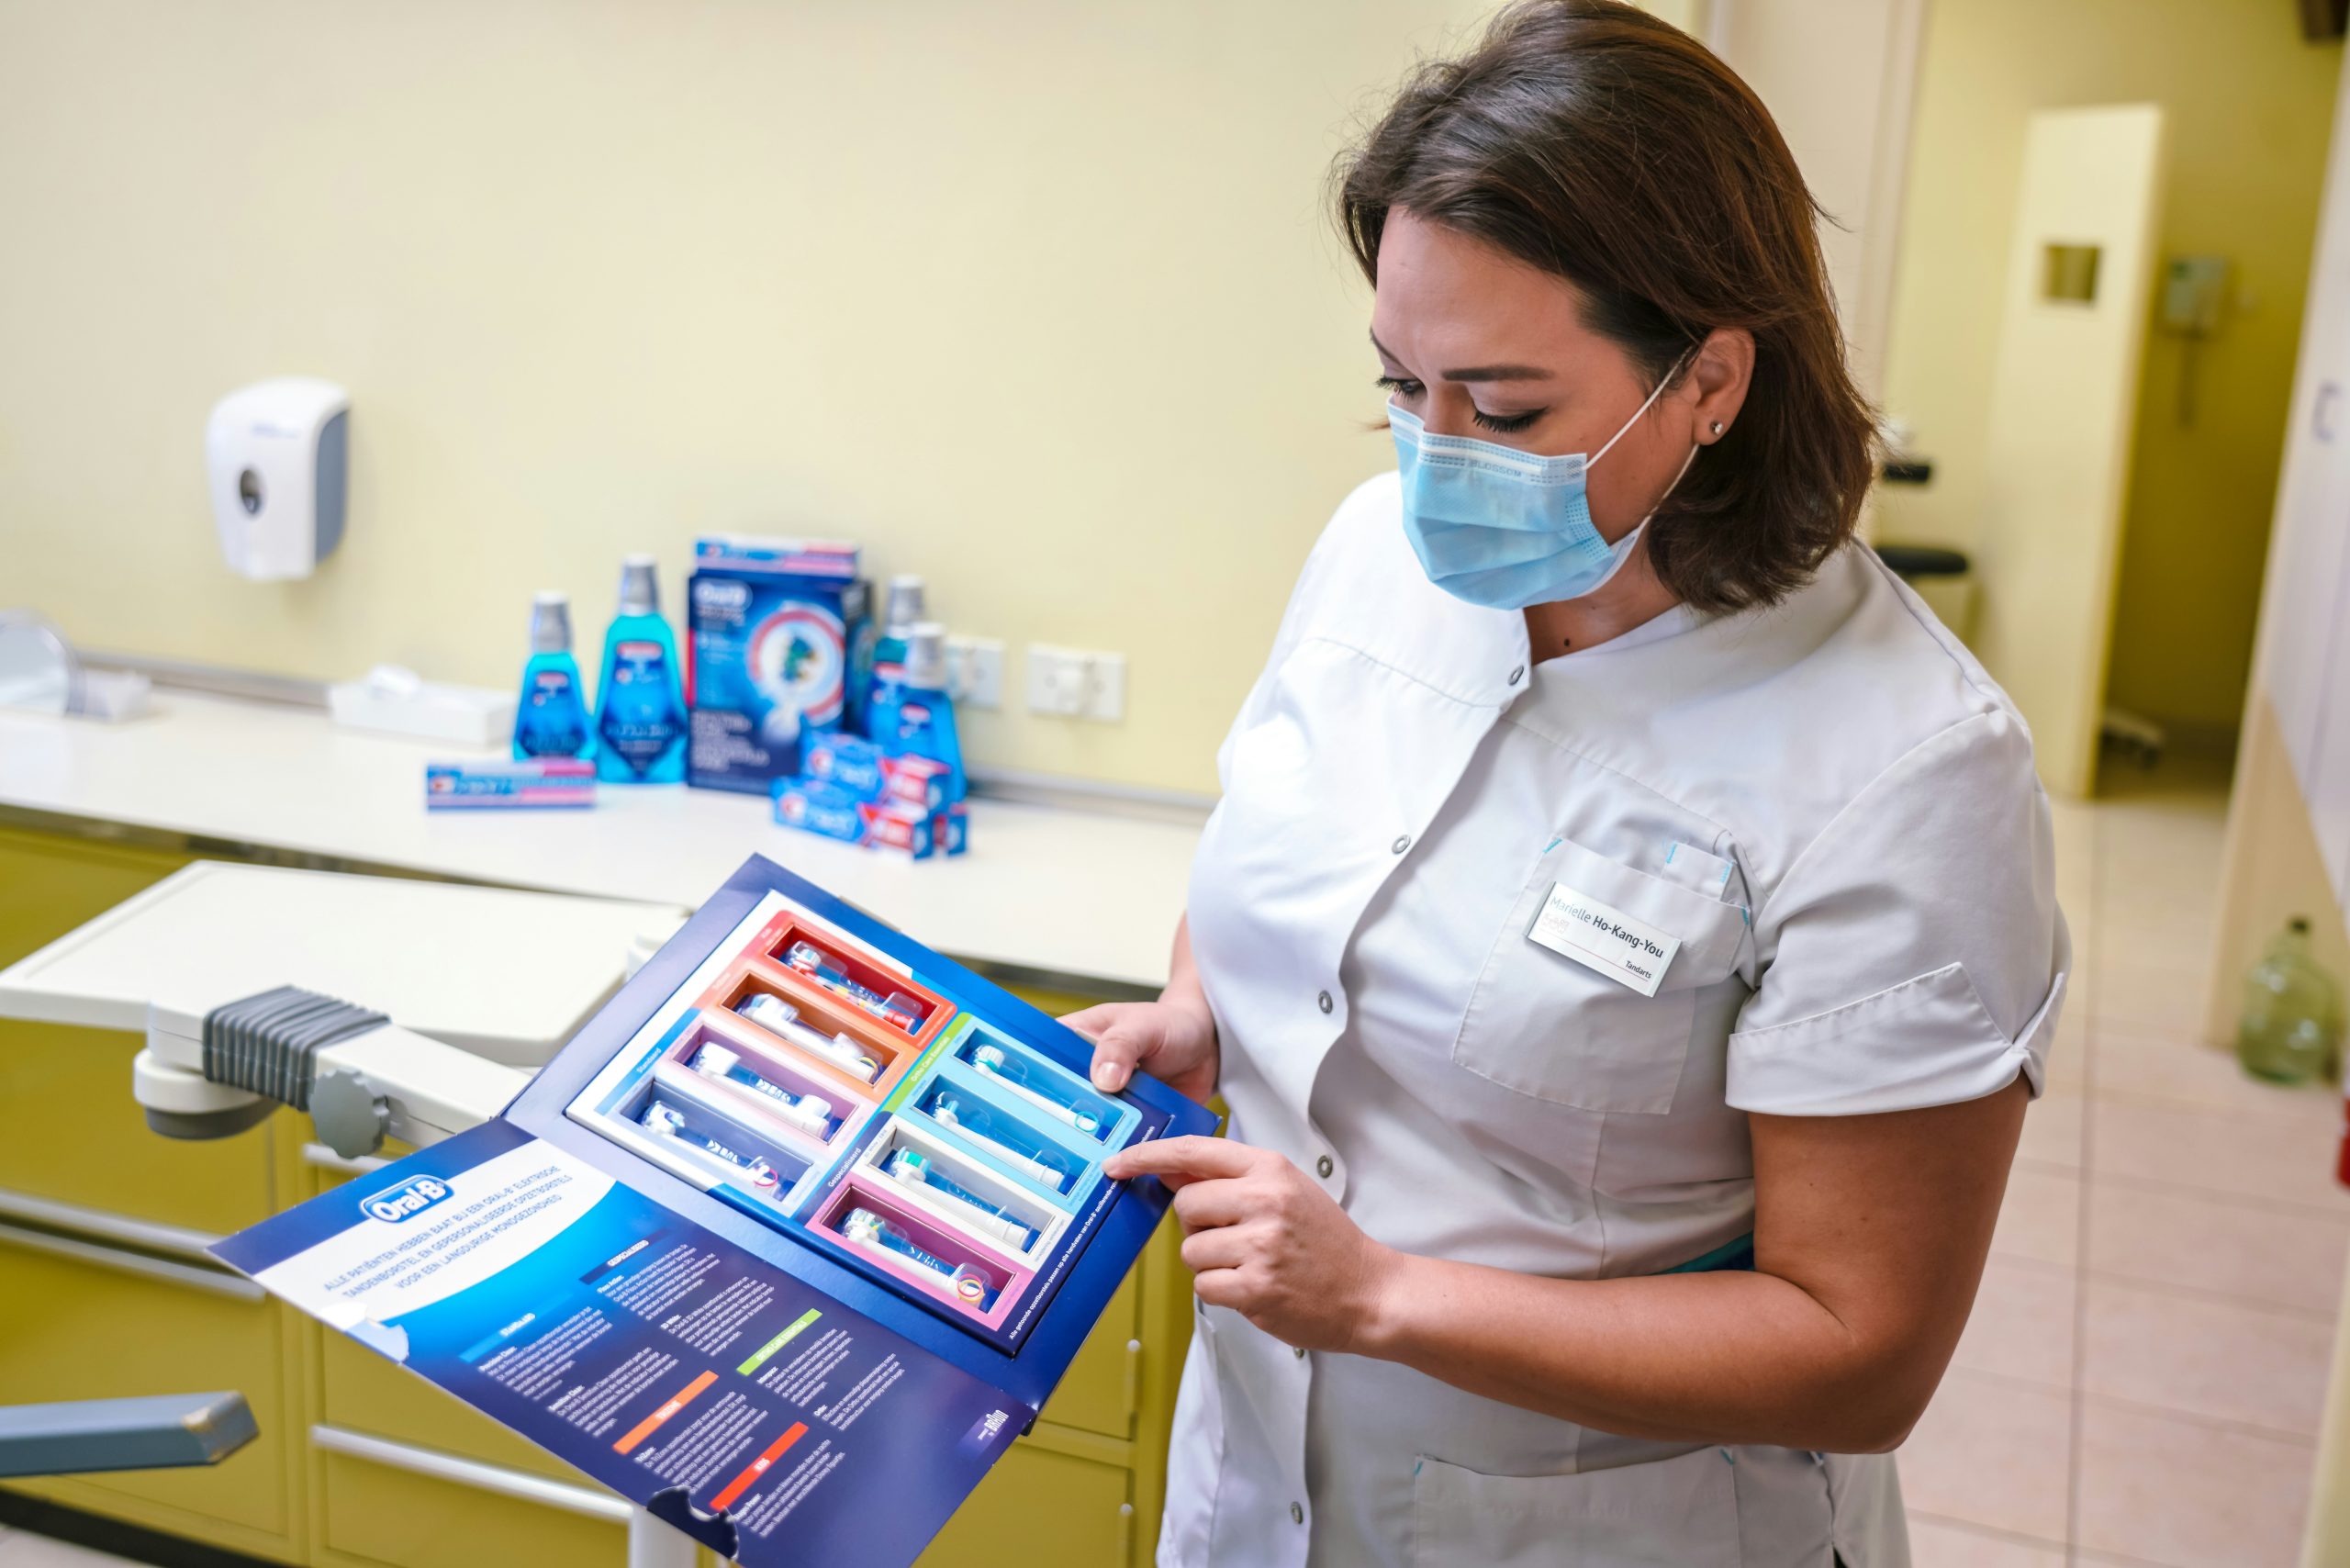 Transform Your Dental Practice with a Powerful Brand Identity